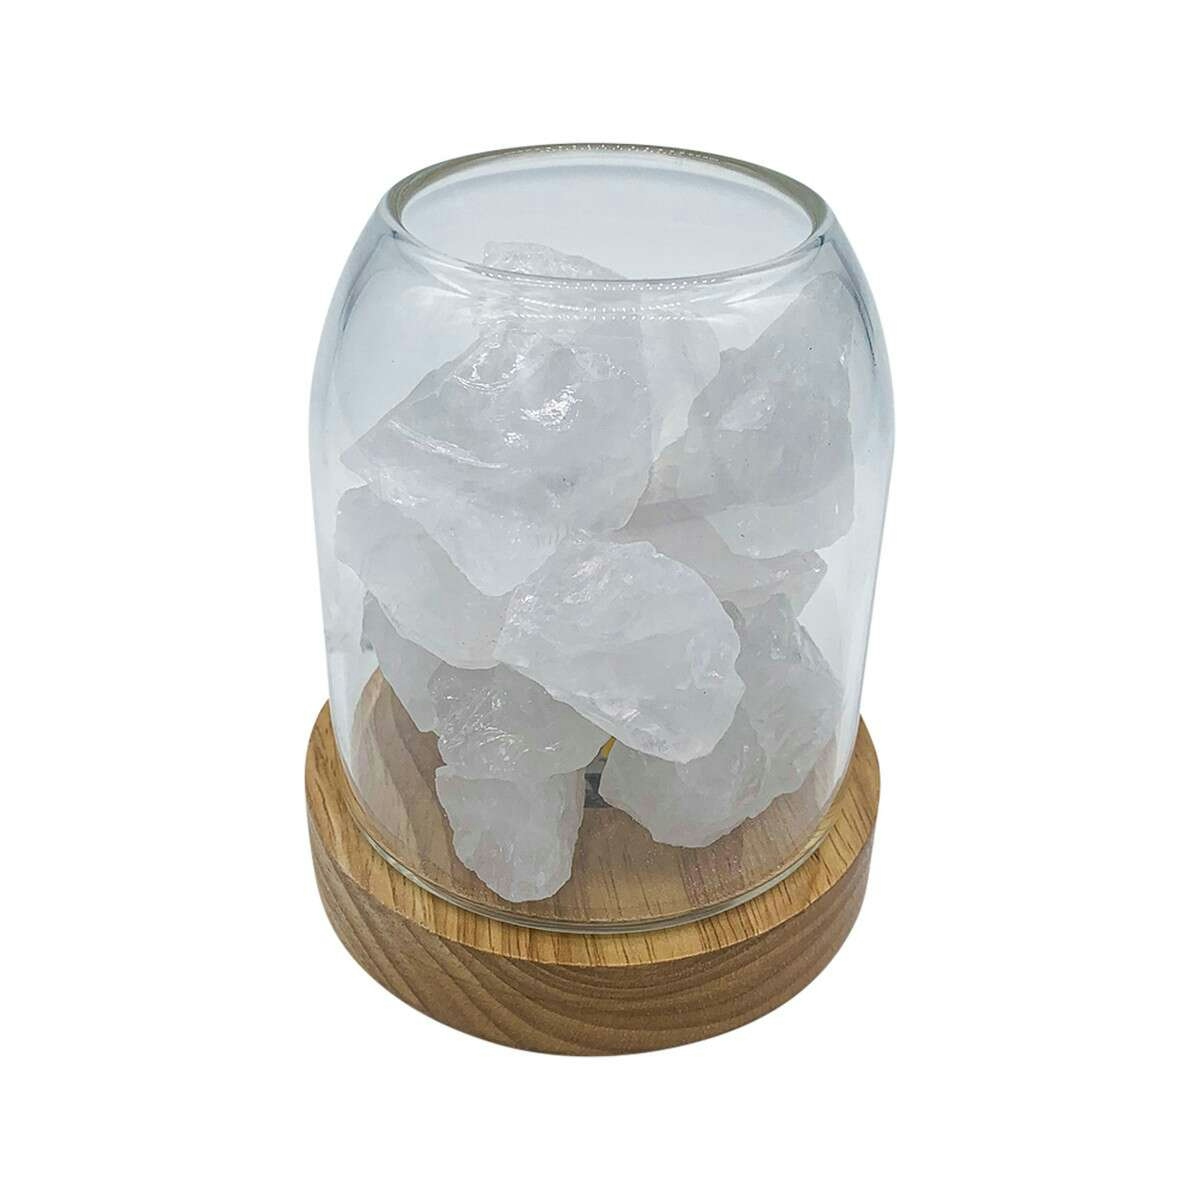 image of Amrita Court Aurora Crystal Diffuser Wooden Base with Light Clear Quartz on white background